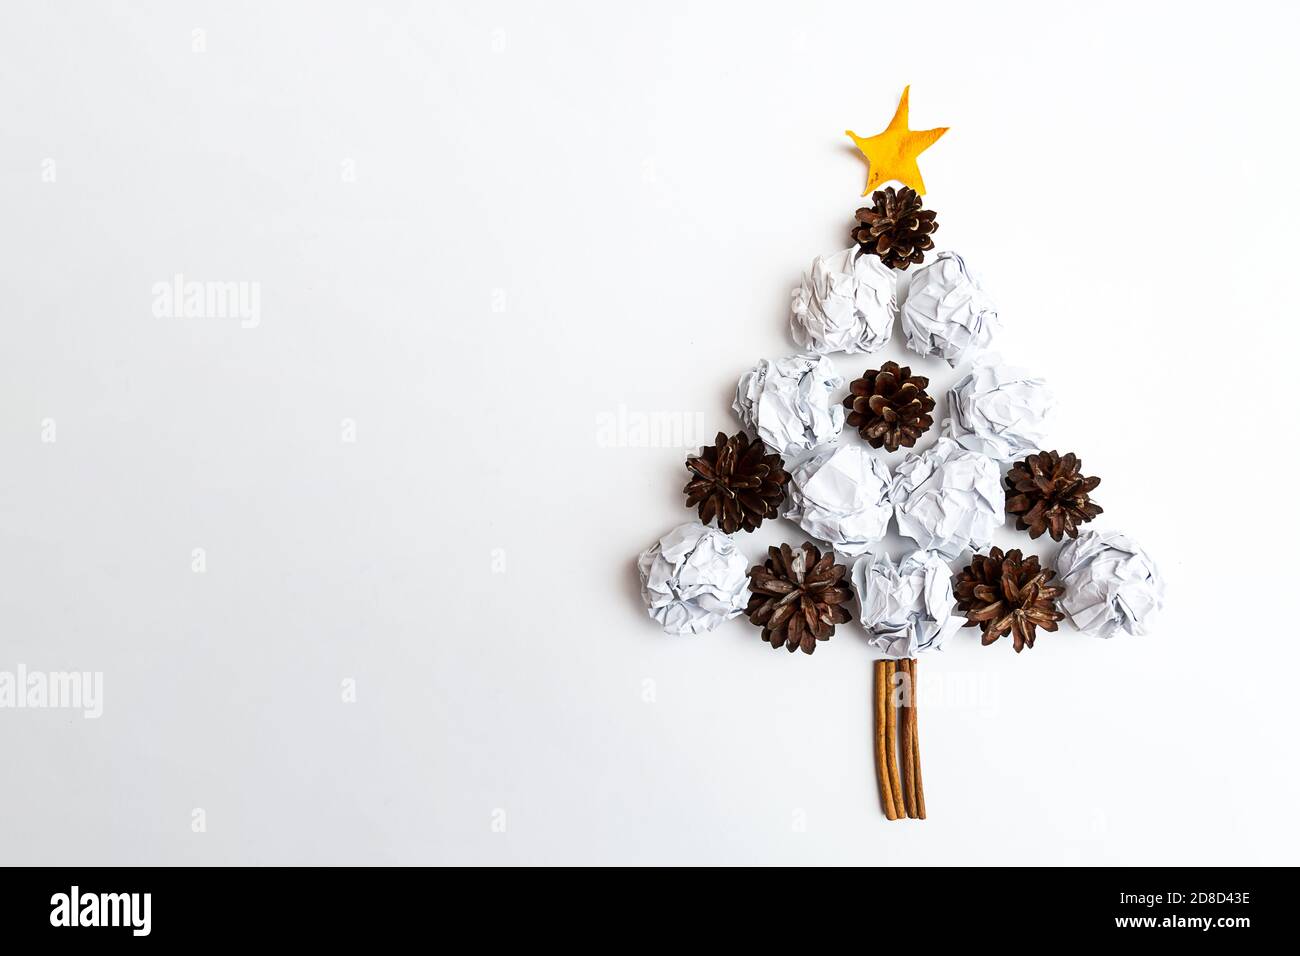 The Christmas tree is made of white paper crumpled into balls and pine cones on a white background. Christmas and New Year concept Stock Photo